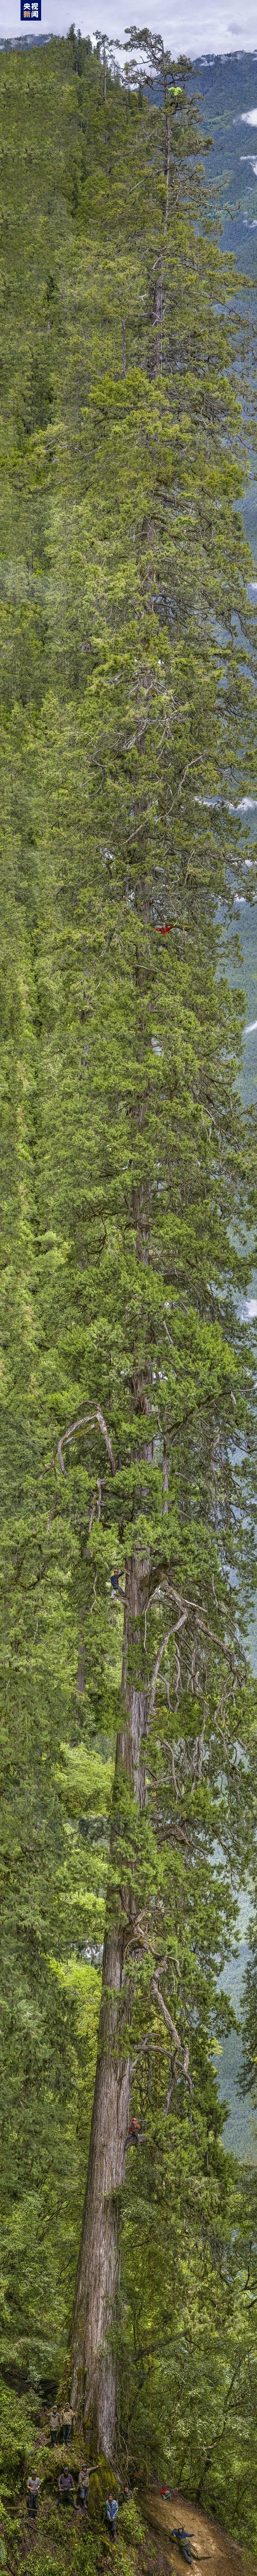 The full-length photo of Cupressus torulosa II, with a height of 99.5 meters (from its base to the highest live branch) is the second tallest tree in a survey conducted in June of 2023 by Chinese scientists to study the tall trees in Xizang Autonomous Region. /CMG